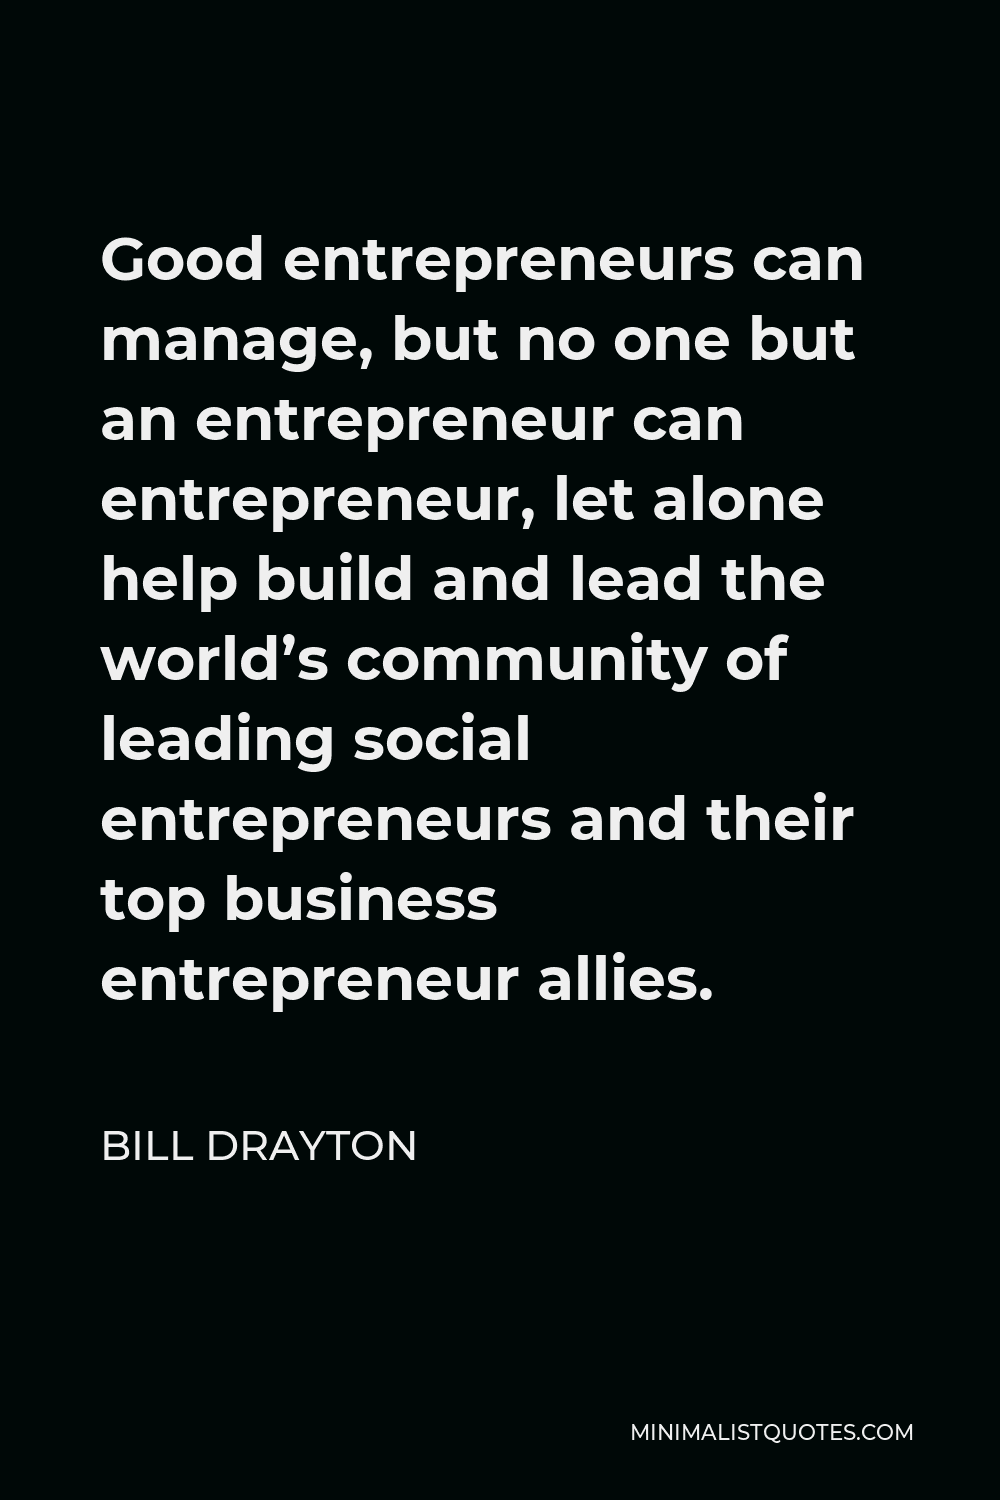 Bill Drayton Quote - Good entrepreneurs can manage, but no one but an entrepreneur can entrepreneur, let alone help build and lead the world’s community of leading social entrepreneurs and their top business entrepreneur allies.